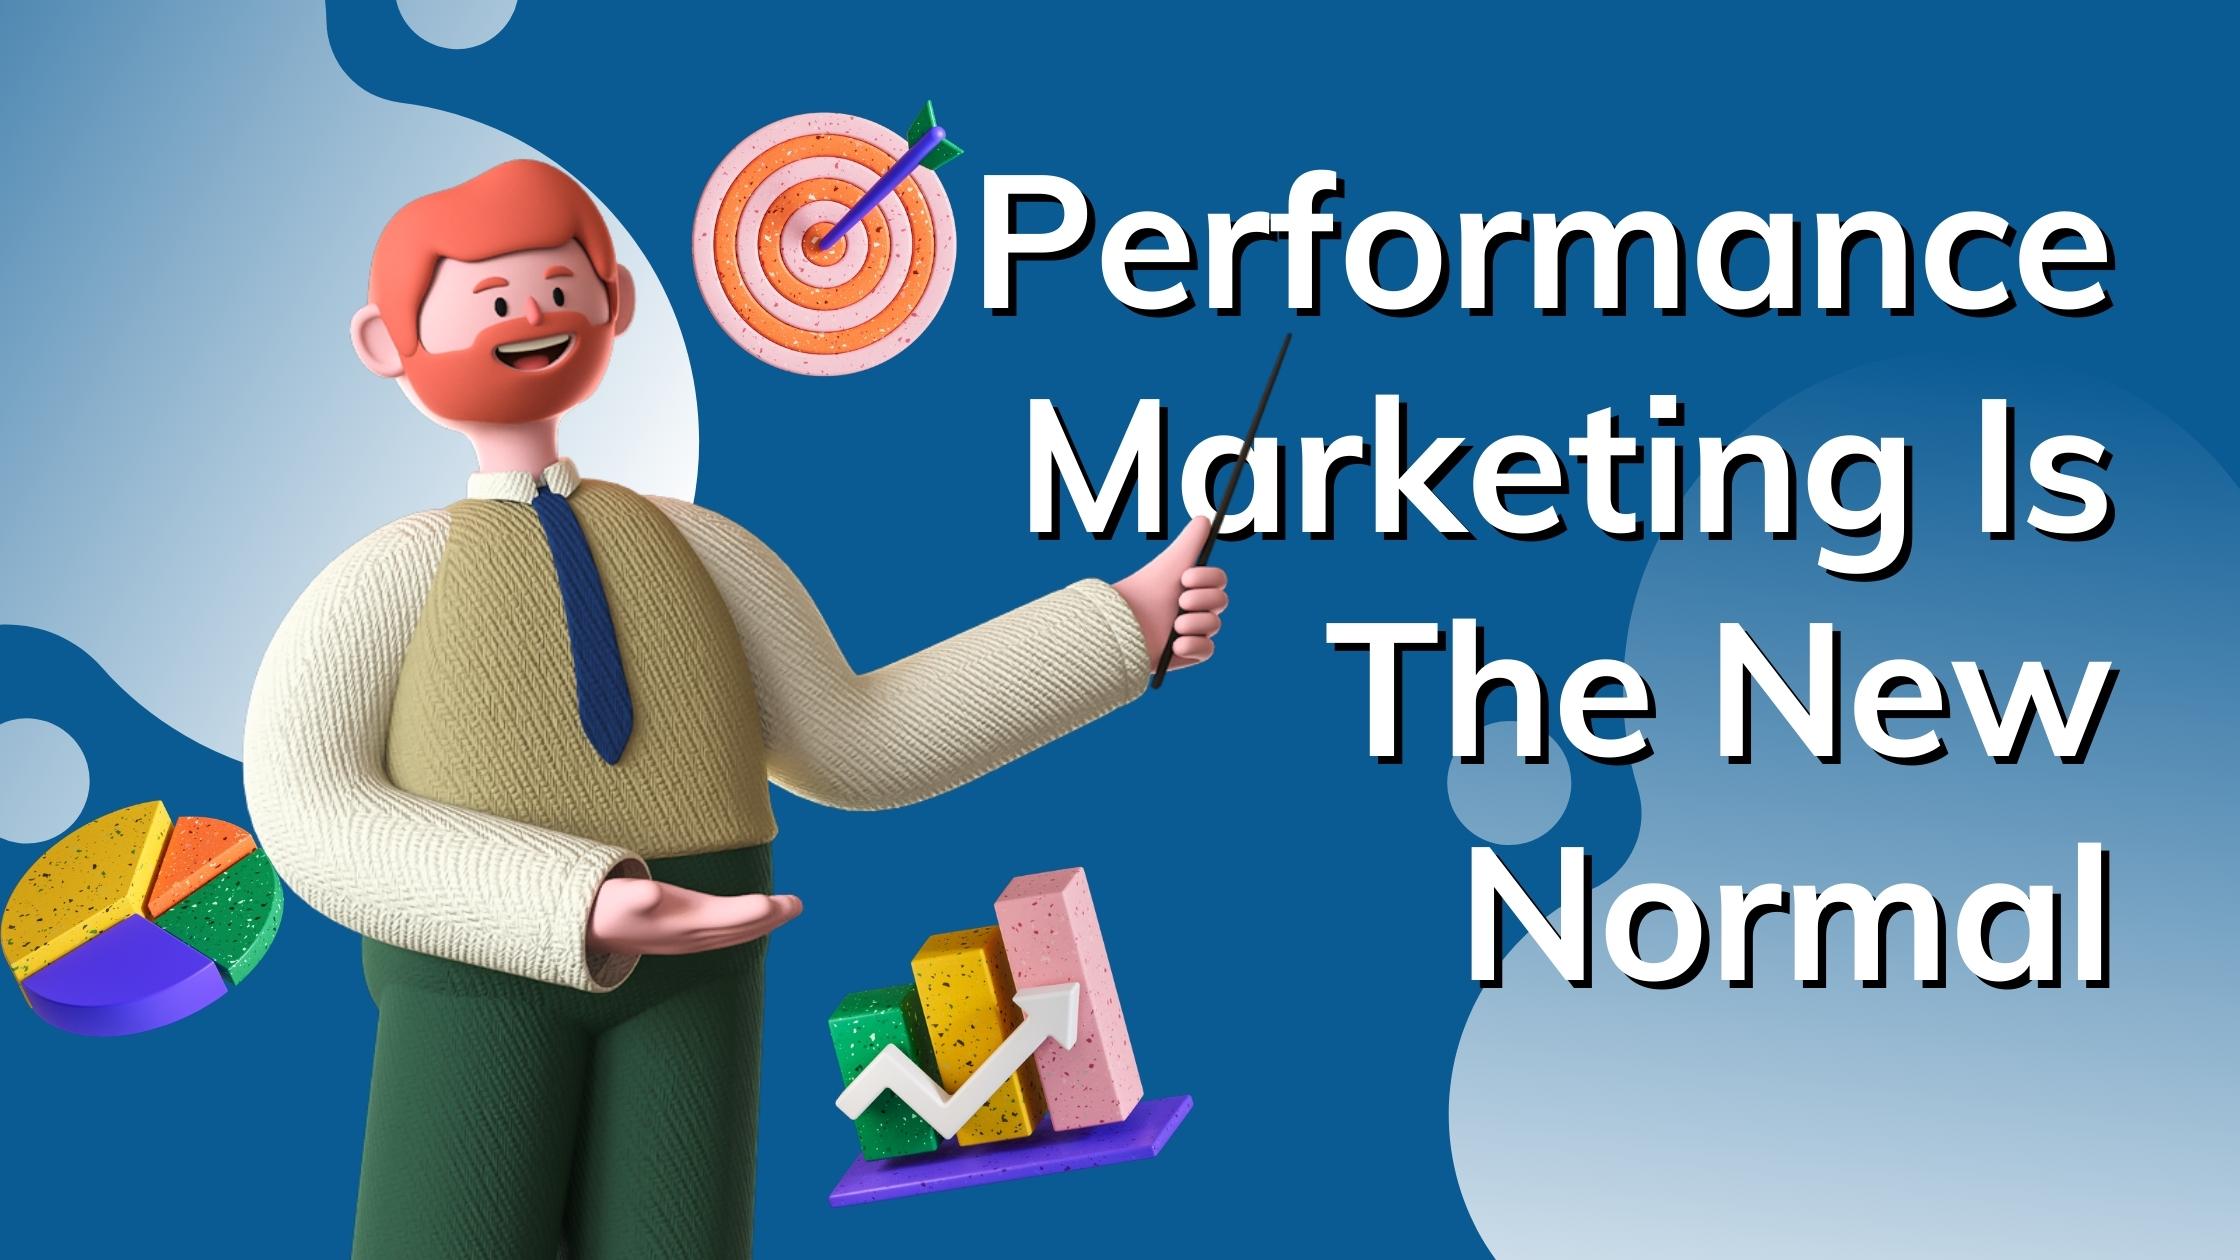 Performance Marketing Is The New Normal